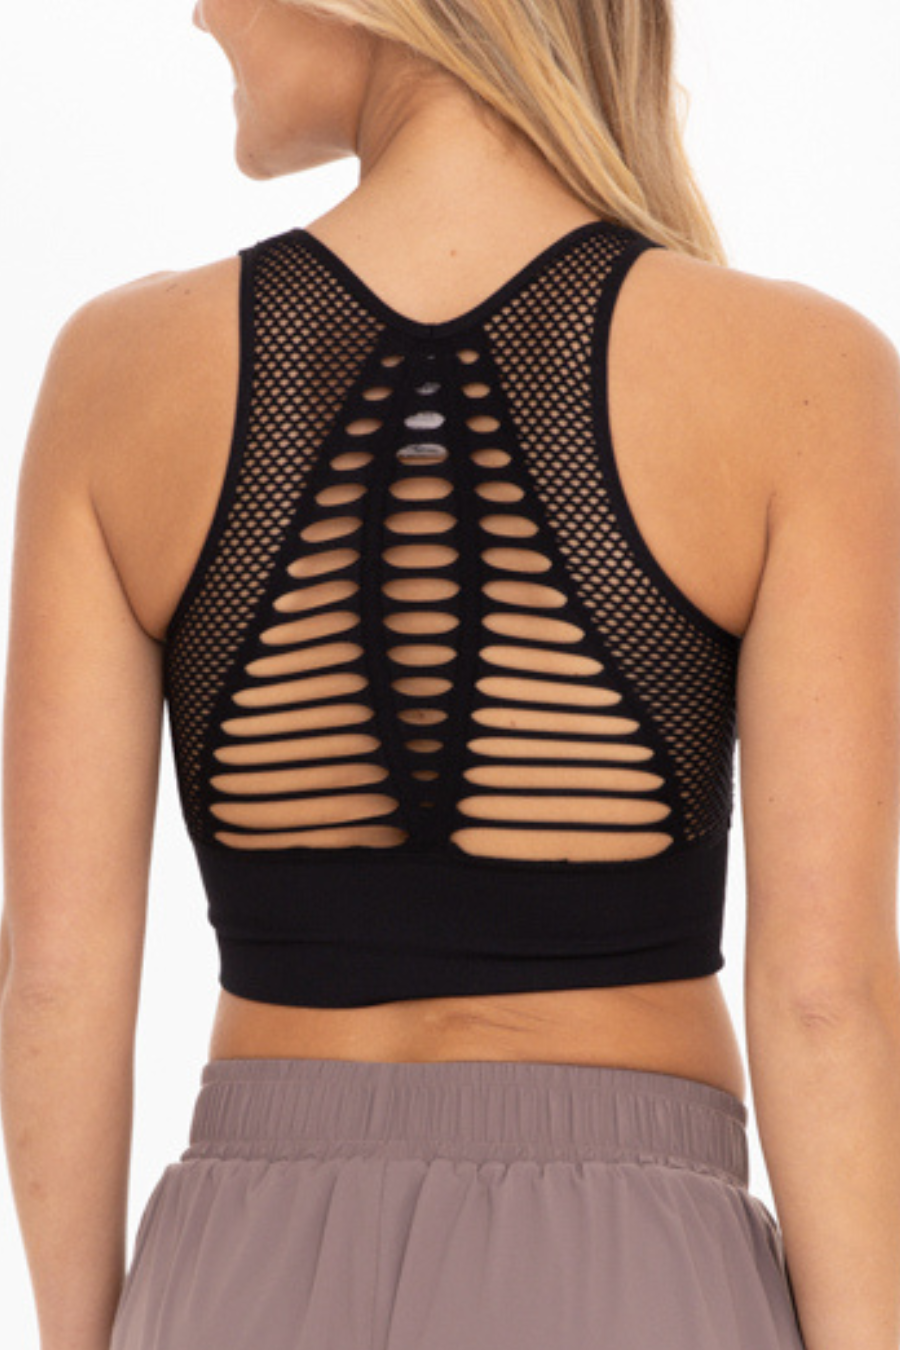 The Isabelle Cut Out Sports Bra